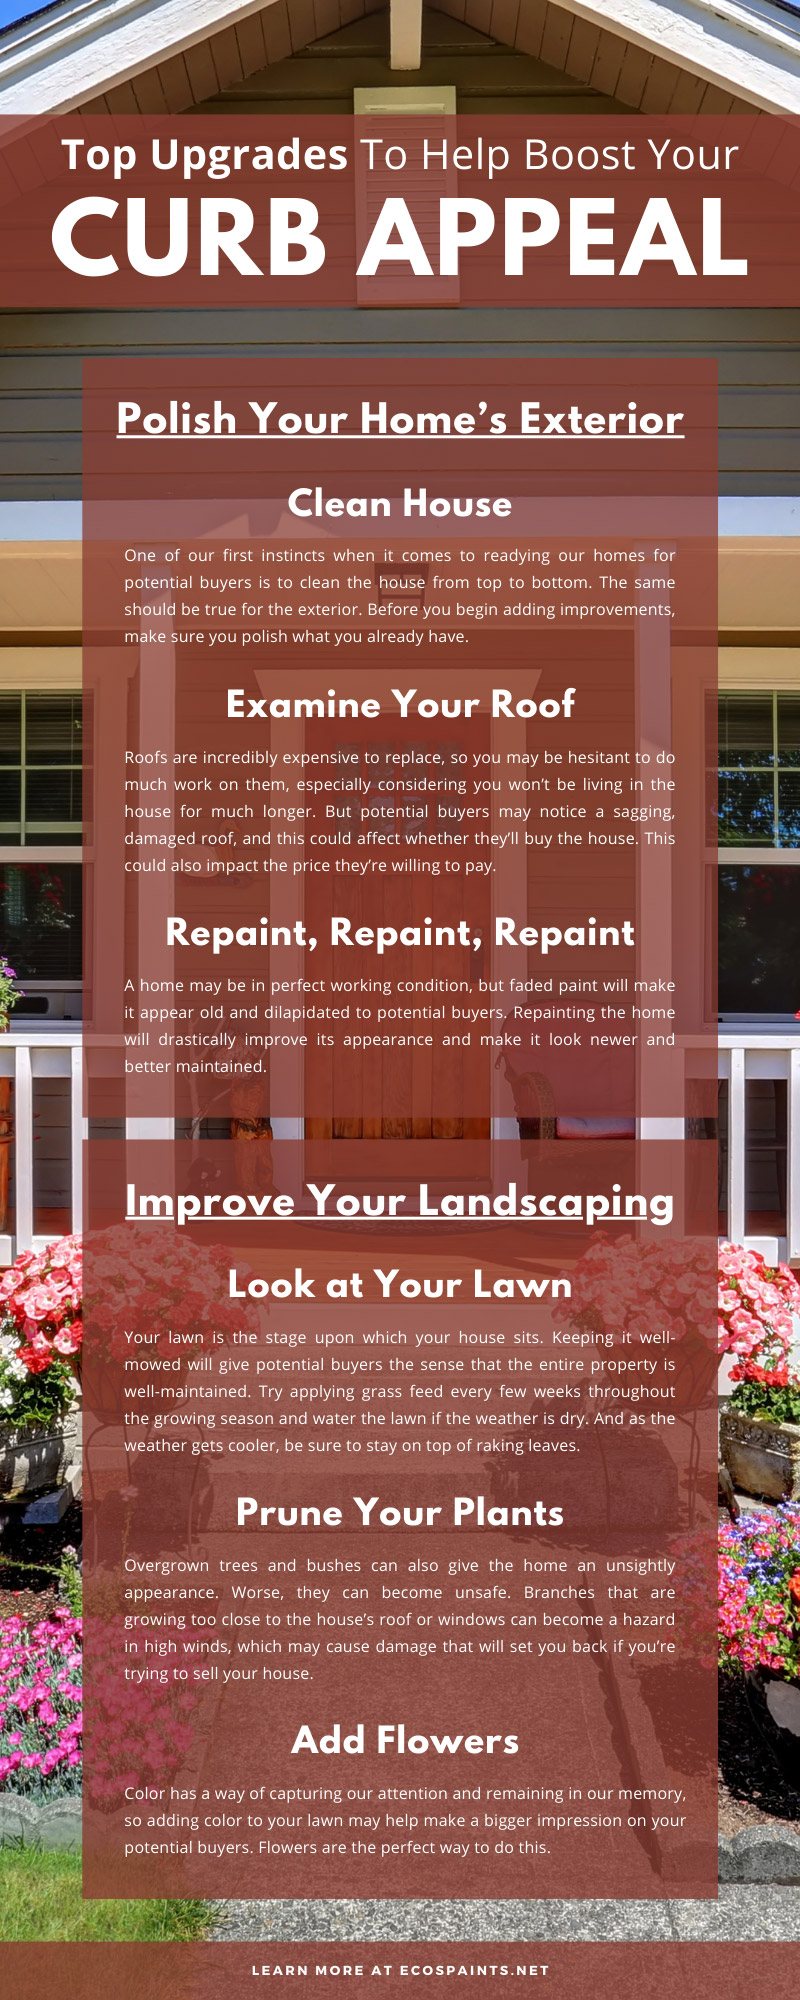 Top Upgrades To Help Boost Your Curb Appeal